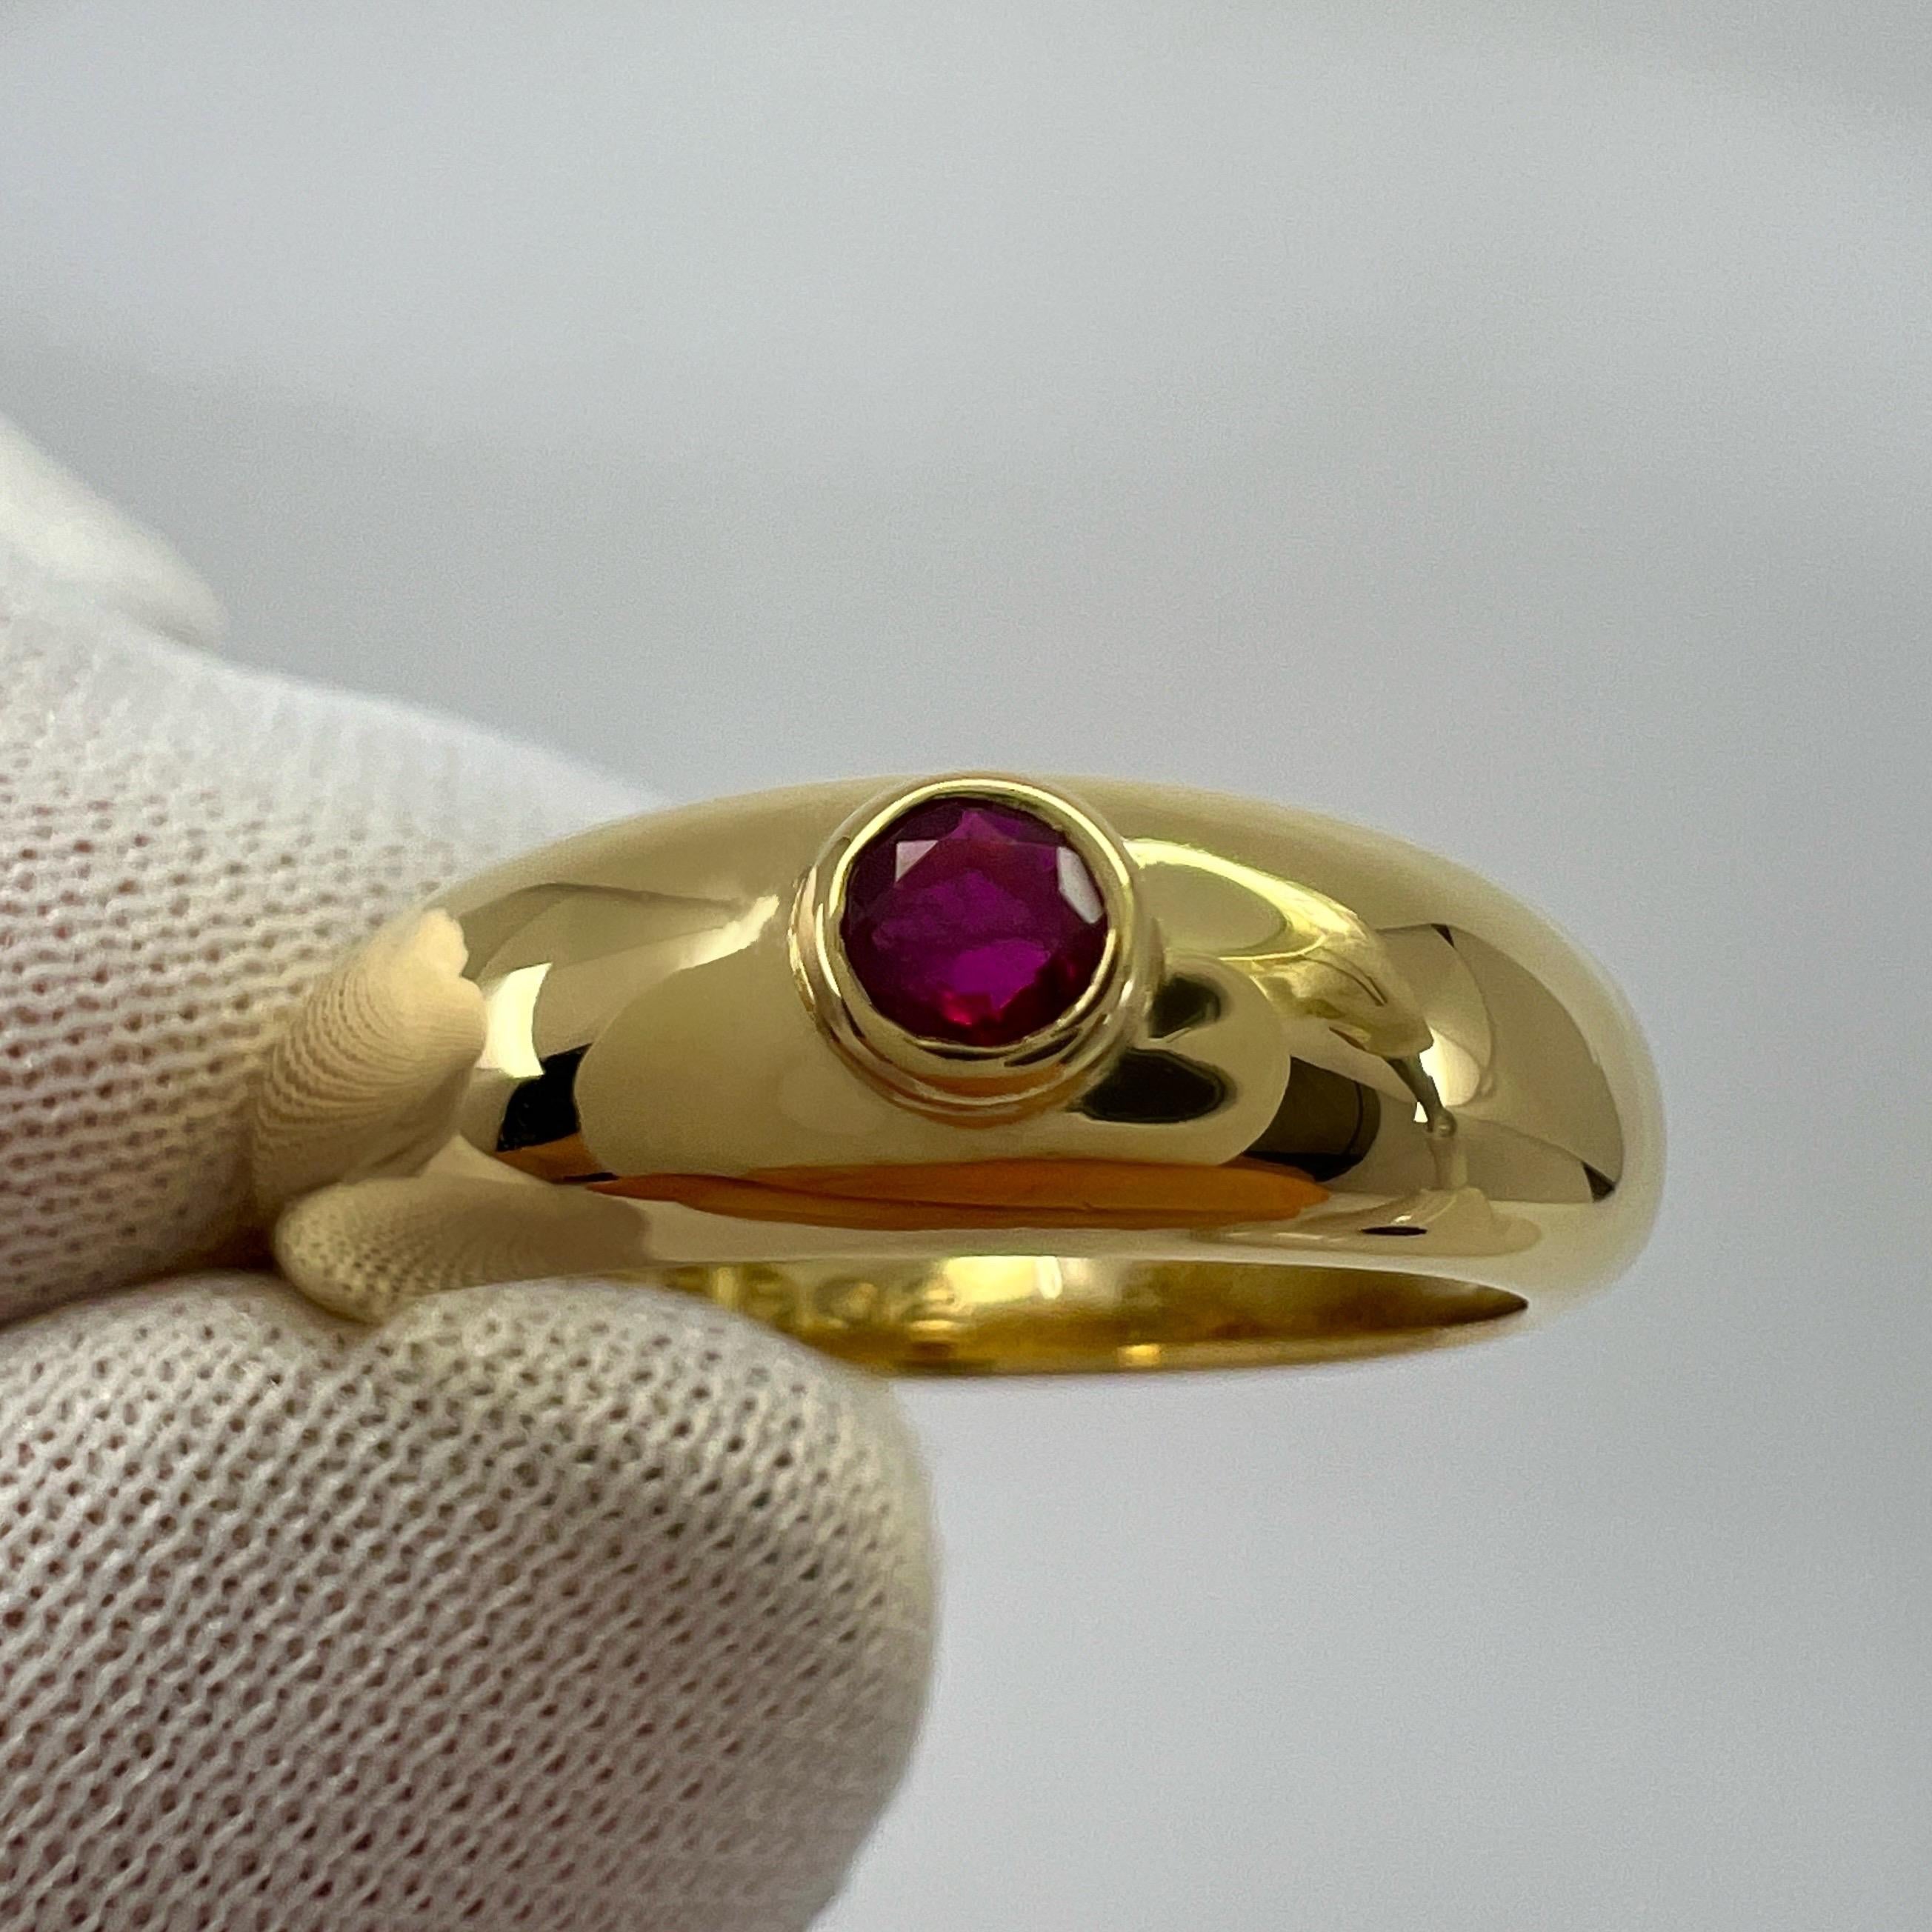 Vintage Cartier Round Cut Red Ruby 18k Yellow Gold Signet Style Domed Ring US5.5 For Sale 6